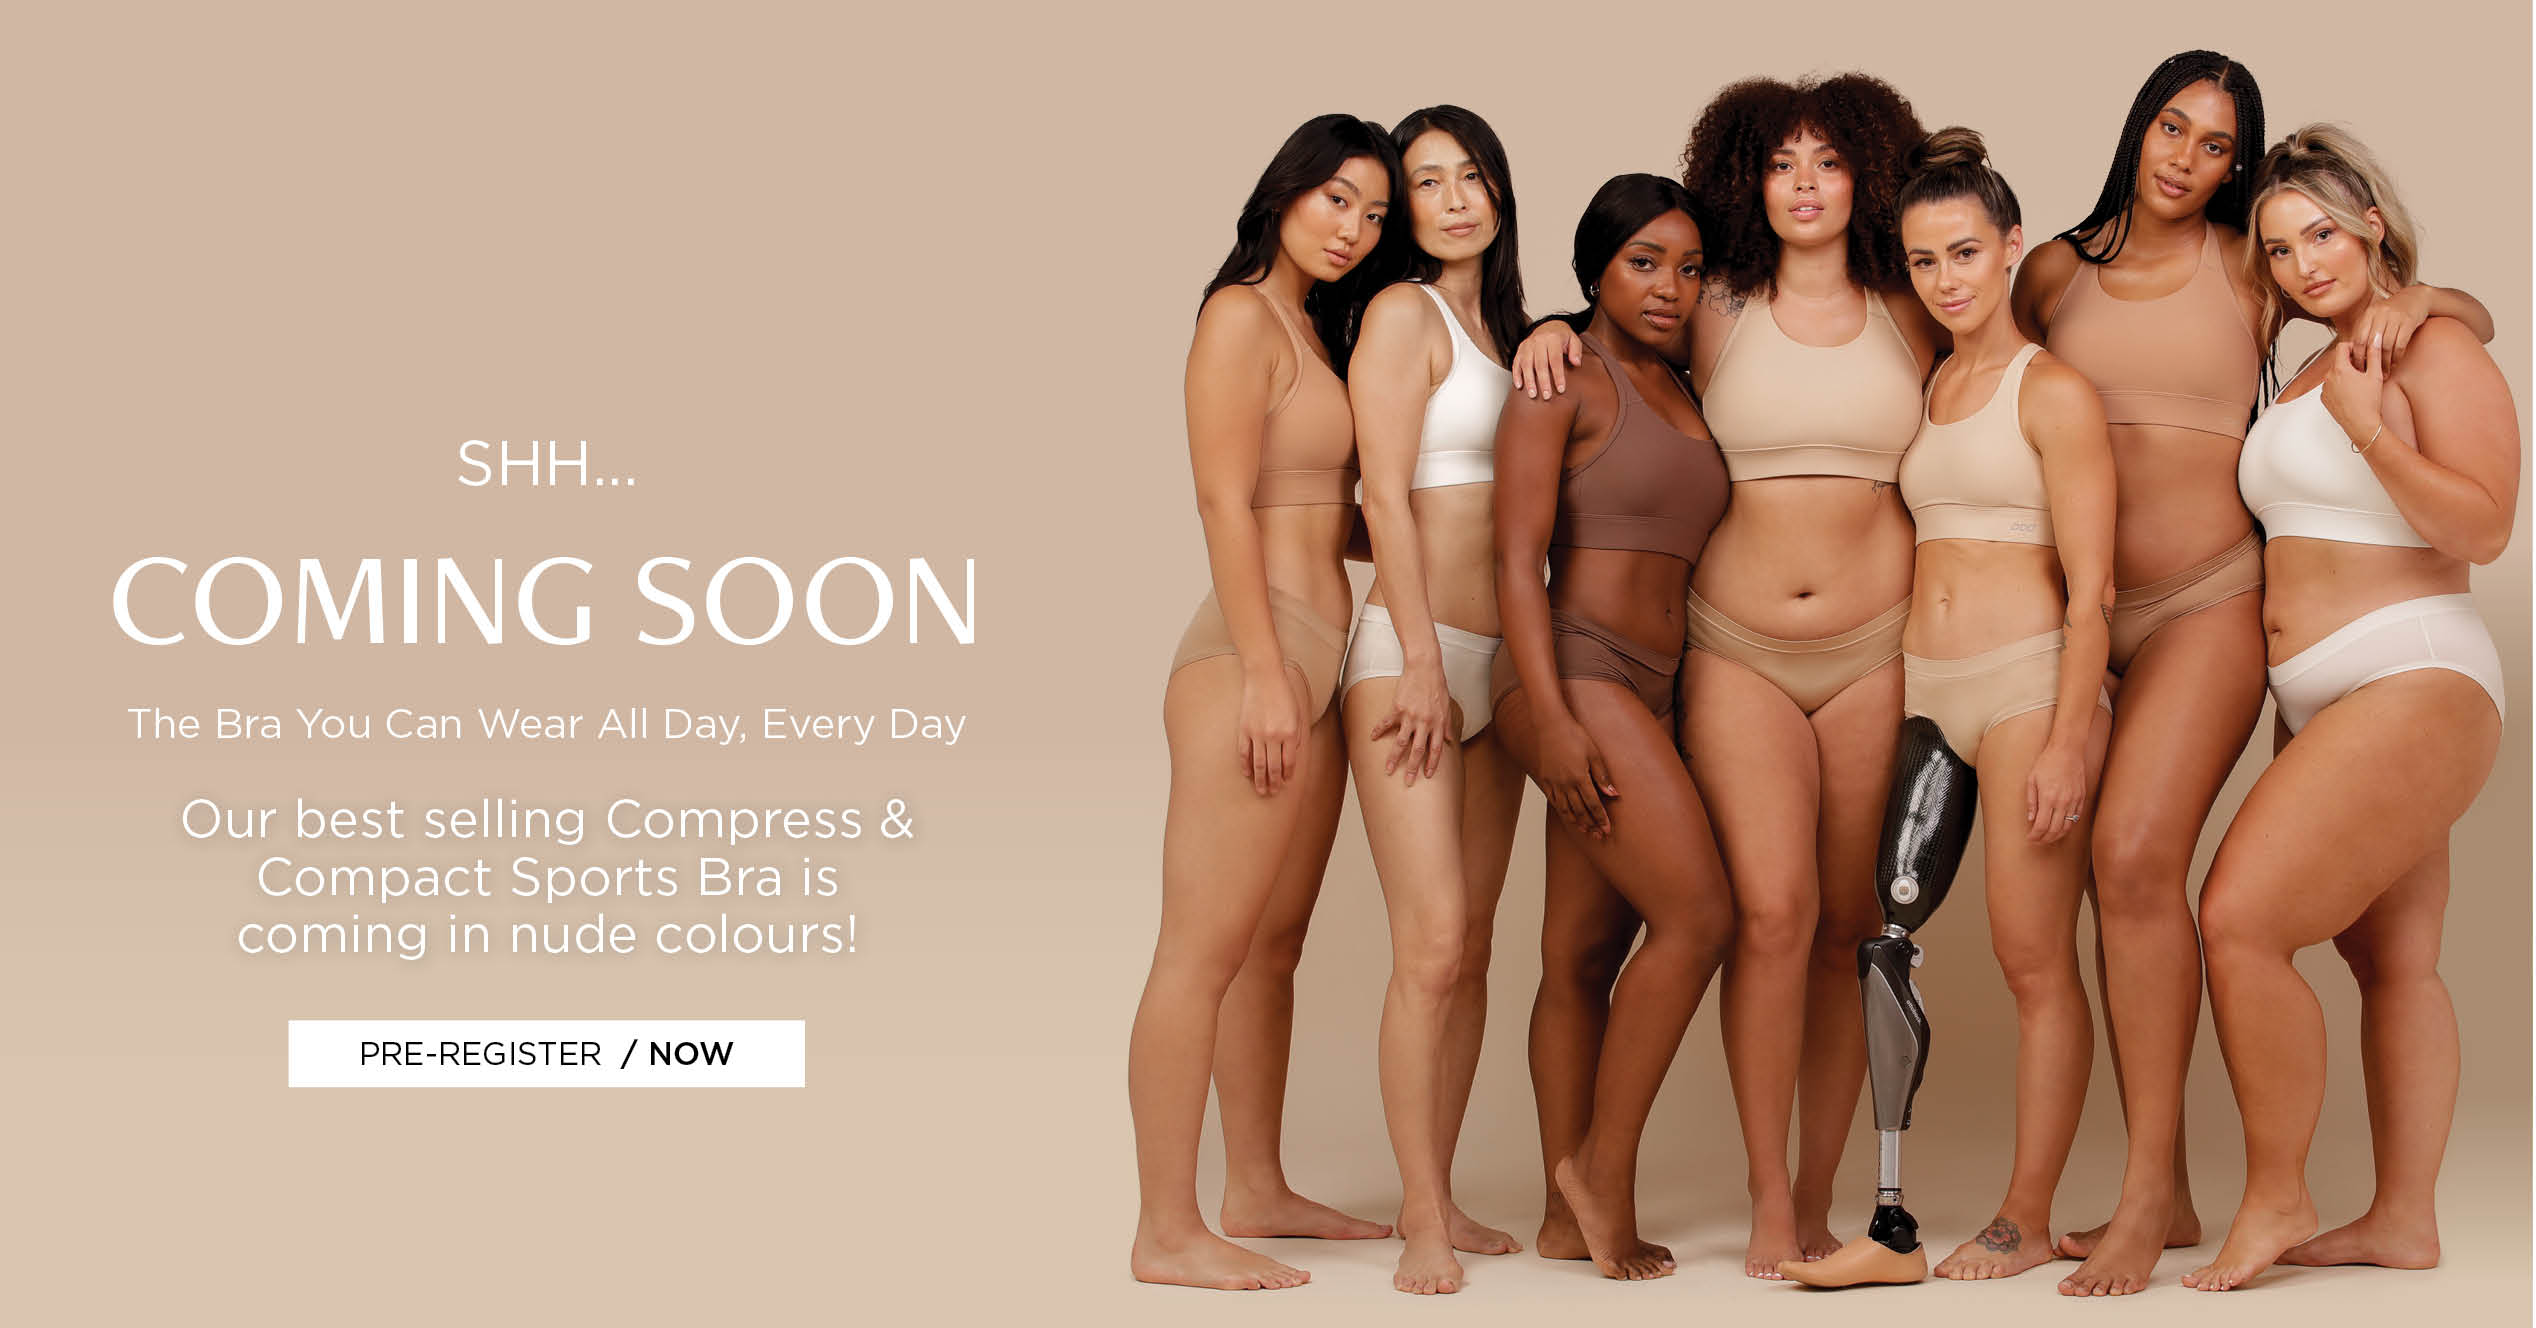 Shh.. Coming Soon. The Bra You Can Wear All Day, Everyday. Our best selling Compress & Compact Sports Bra is coming in nude colours!